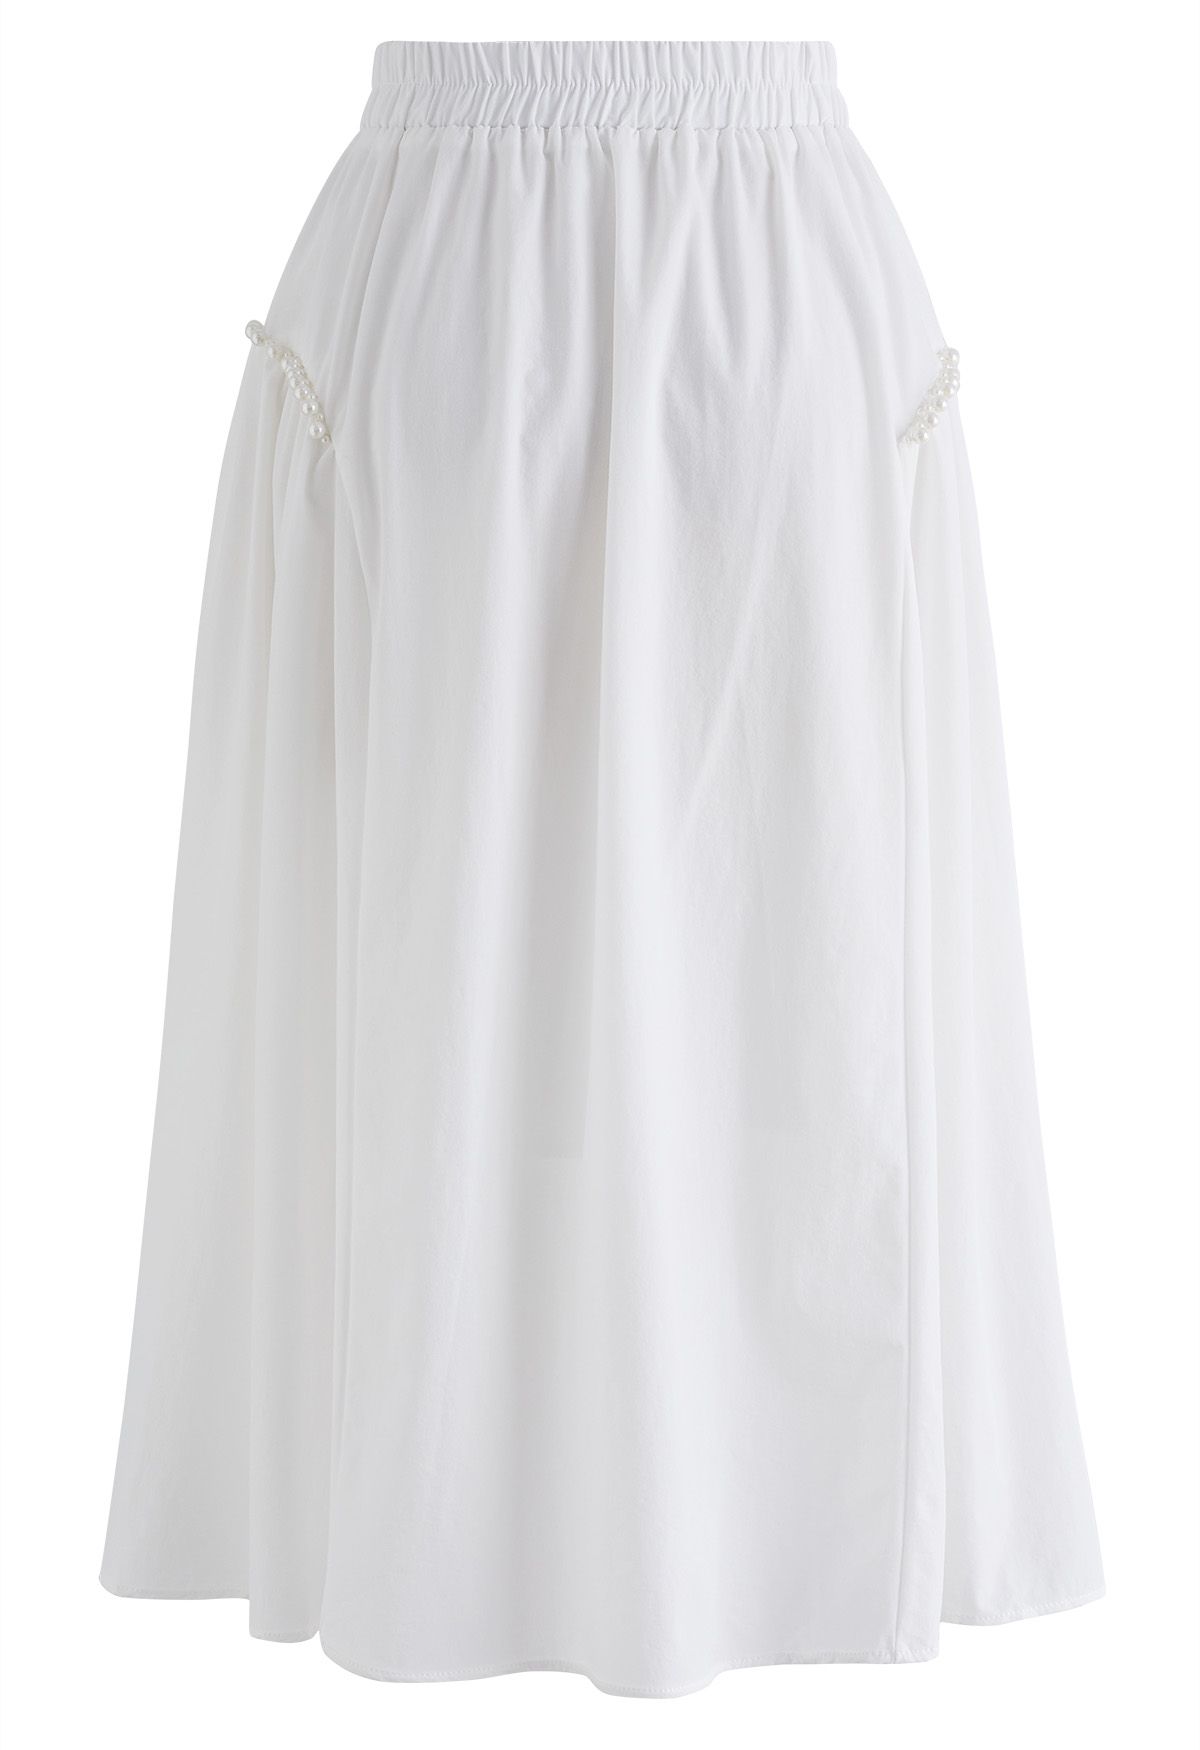 Pearl Embellished Midi Skirt in White - Retro, Indie and Unique Fashion